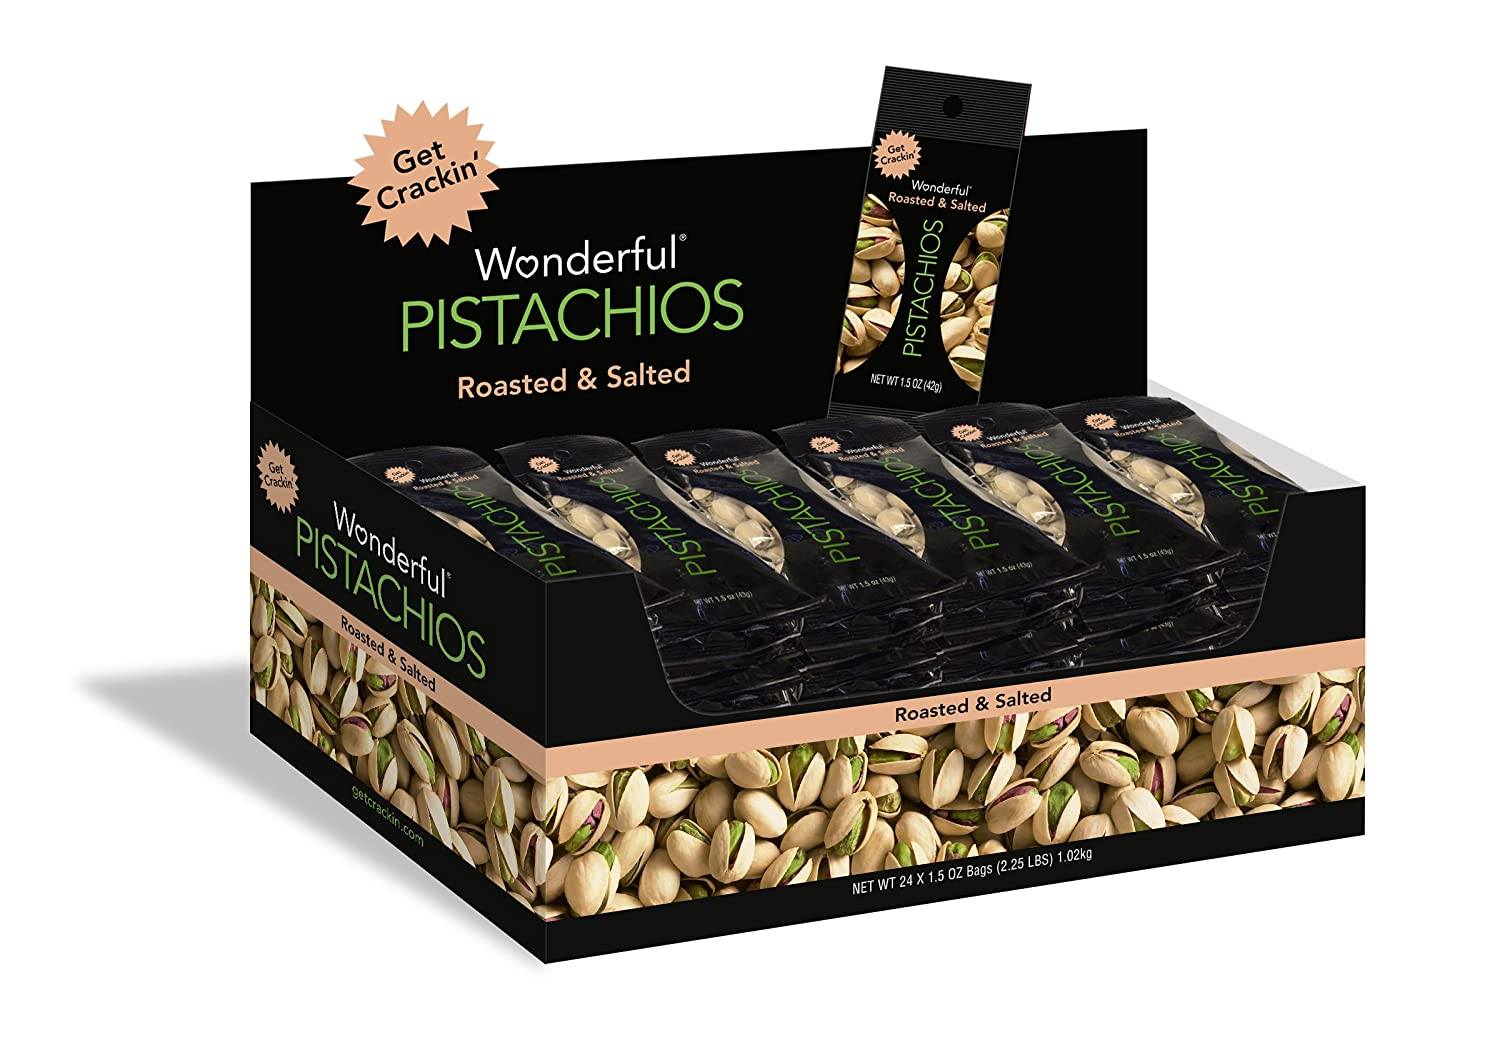 Wonderful Pistachios Wonderful Pistachios & Almonds Roasted & Salted 1.5 Oz-24 Count 